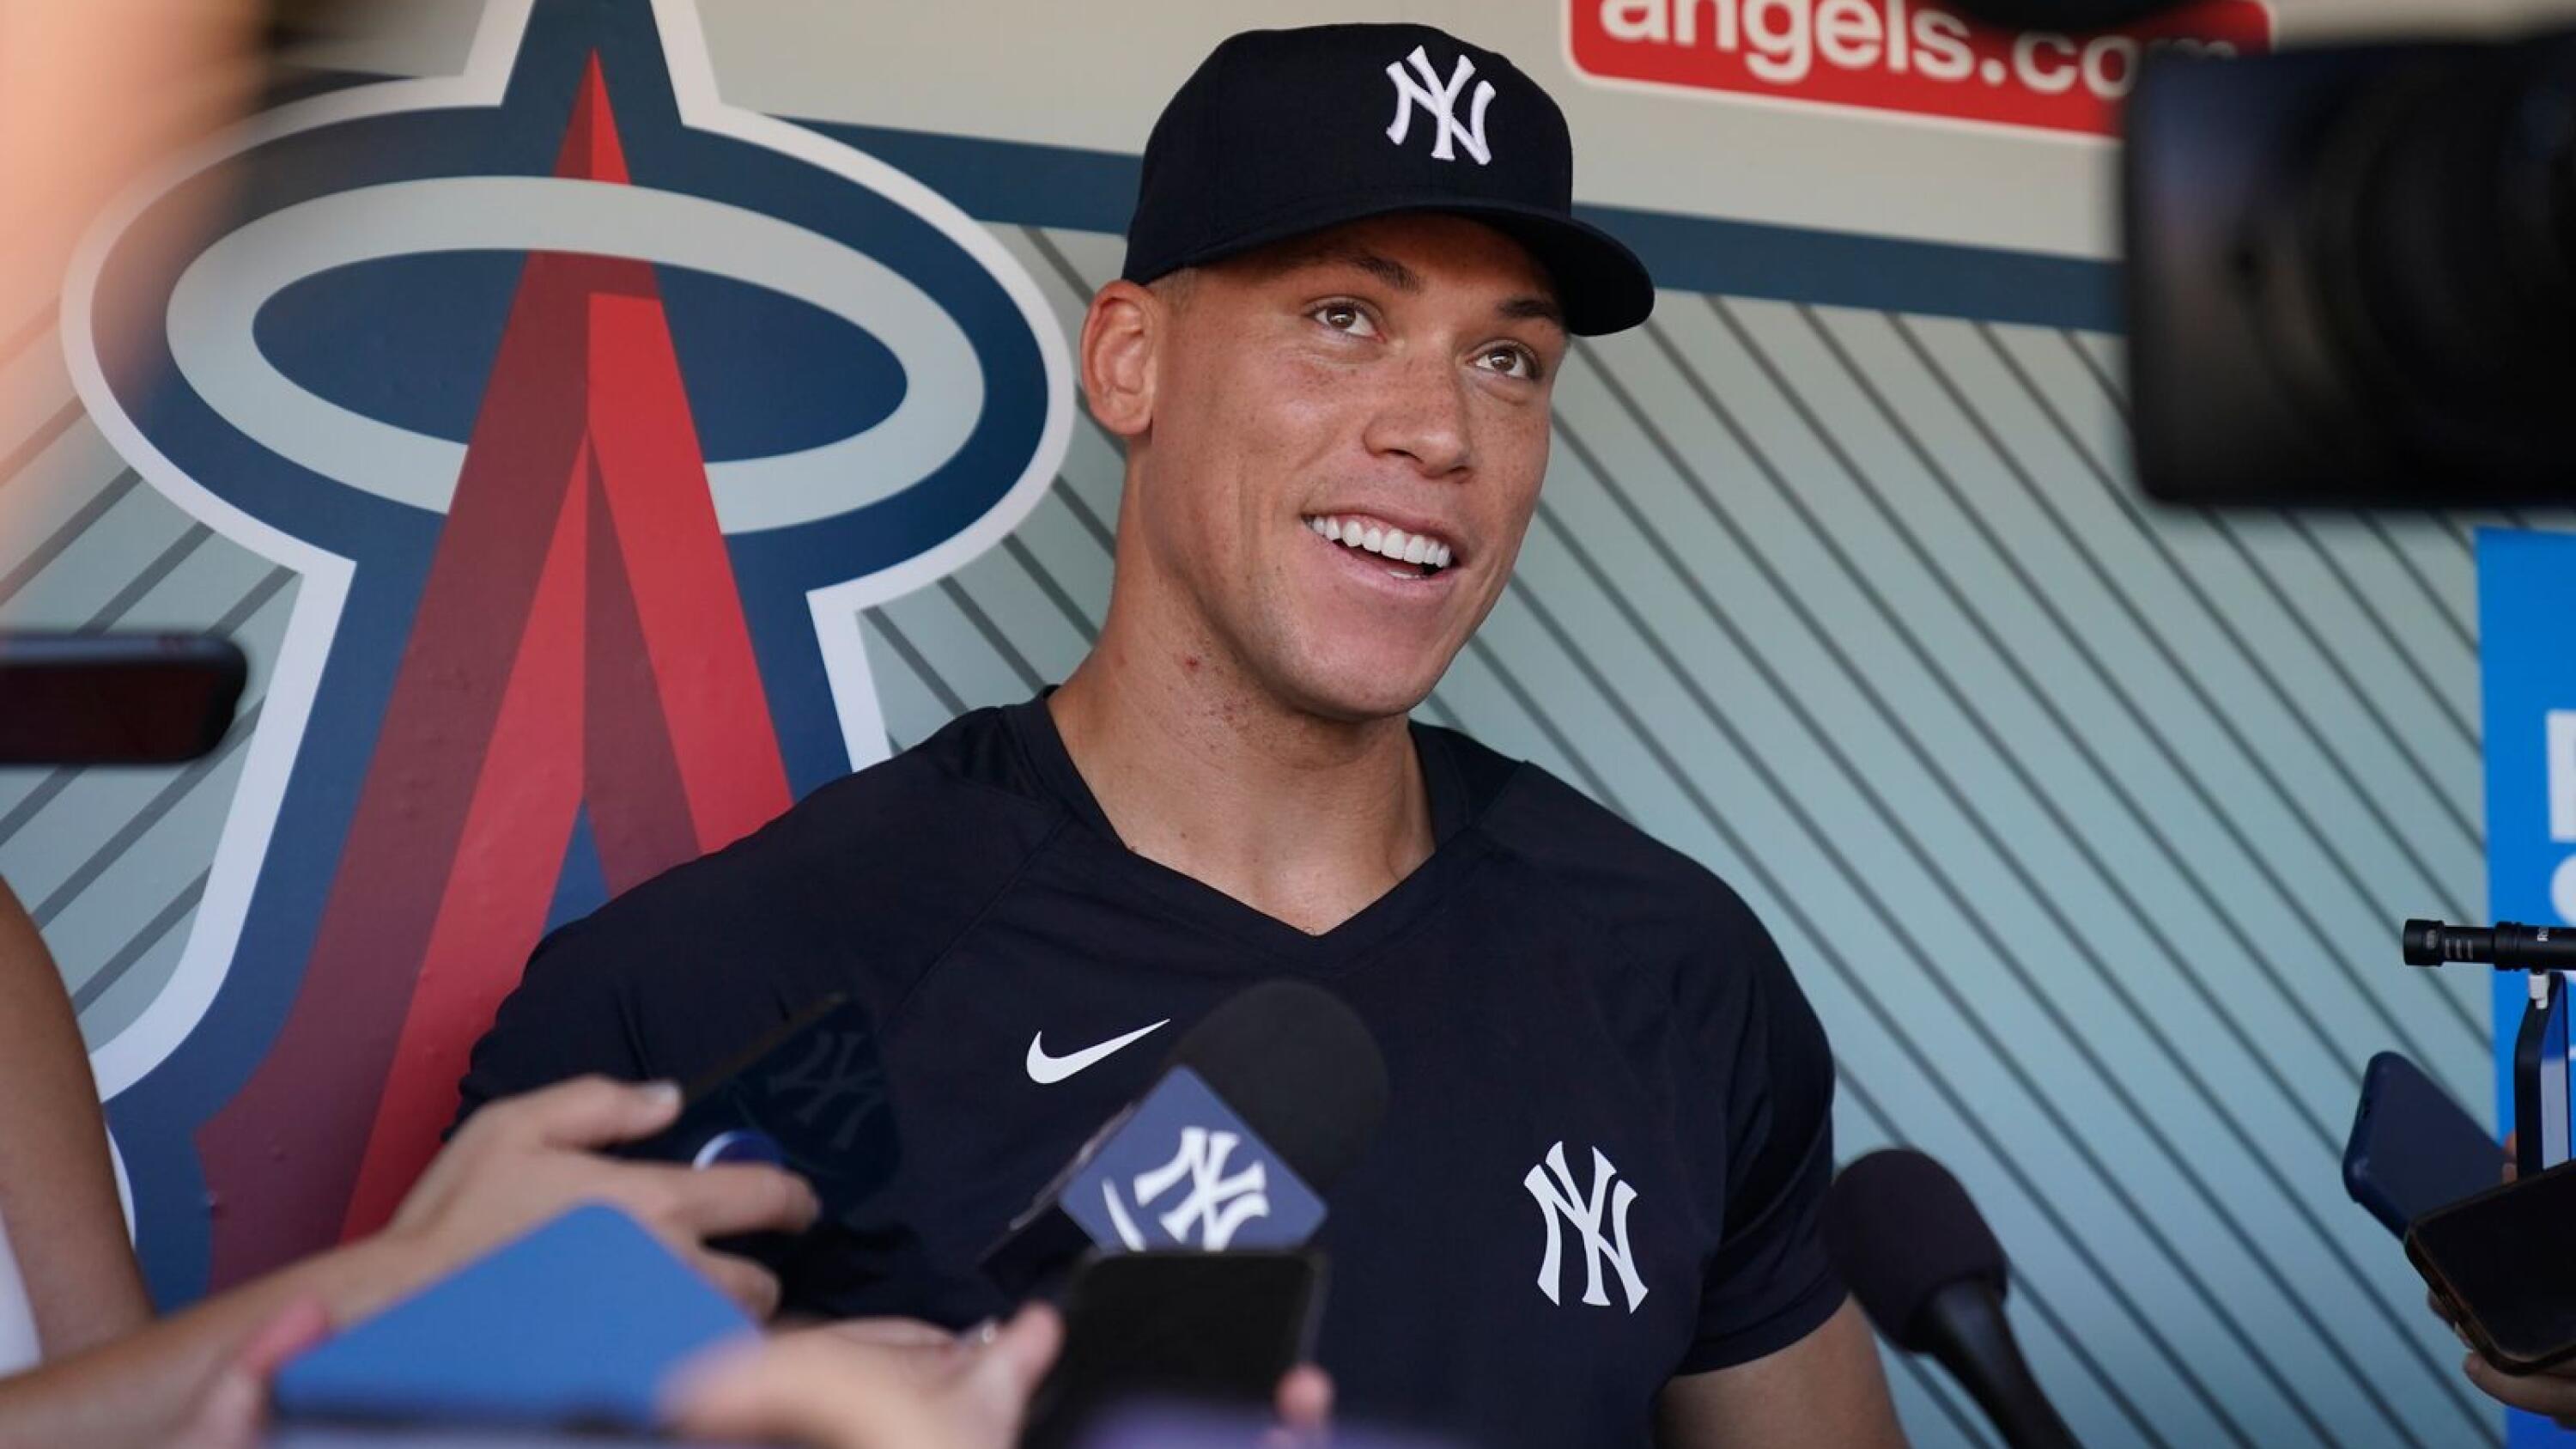 Aaron Judge close to return from injured list